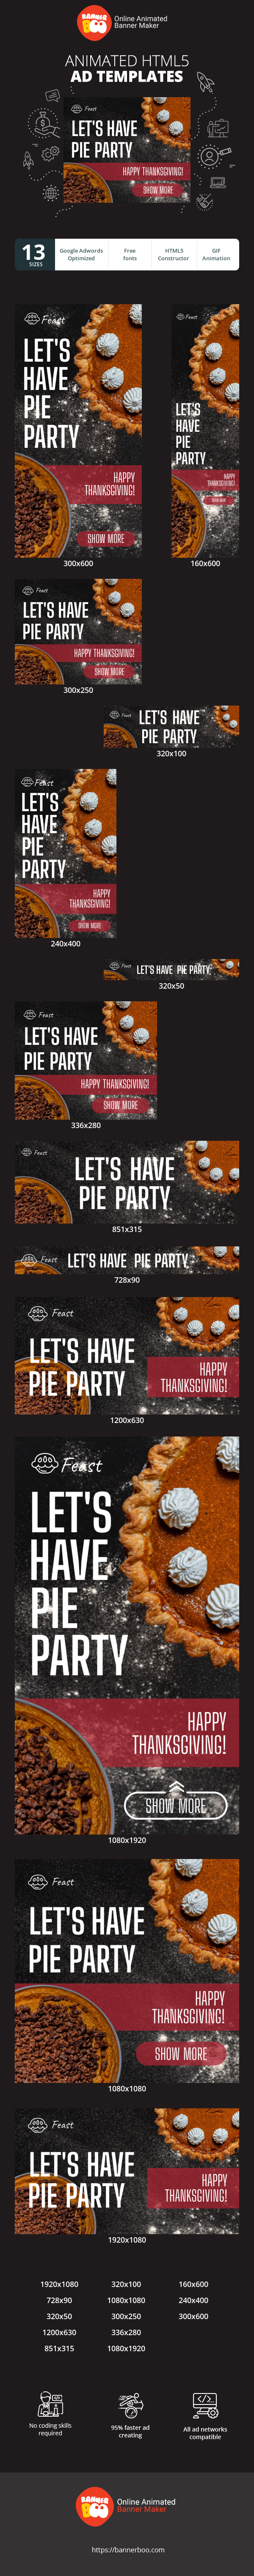 Banner ad template — Let's Have Pie Party —Happy Thanksgiving